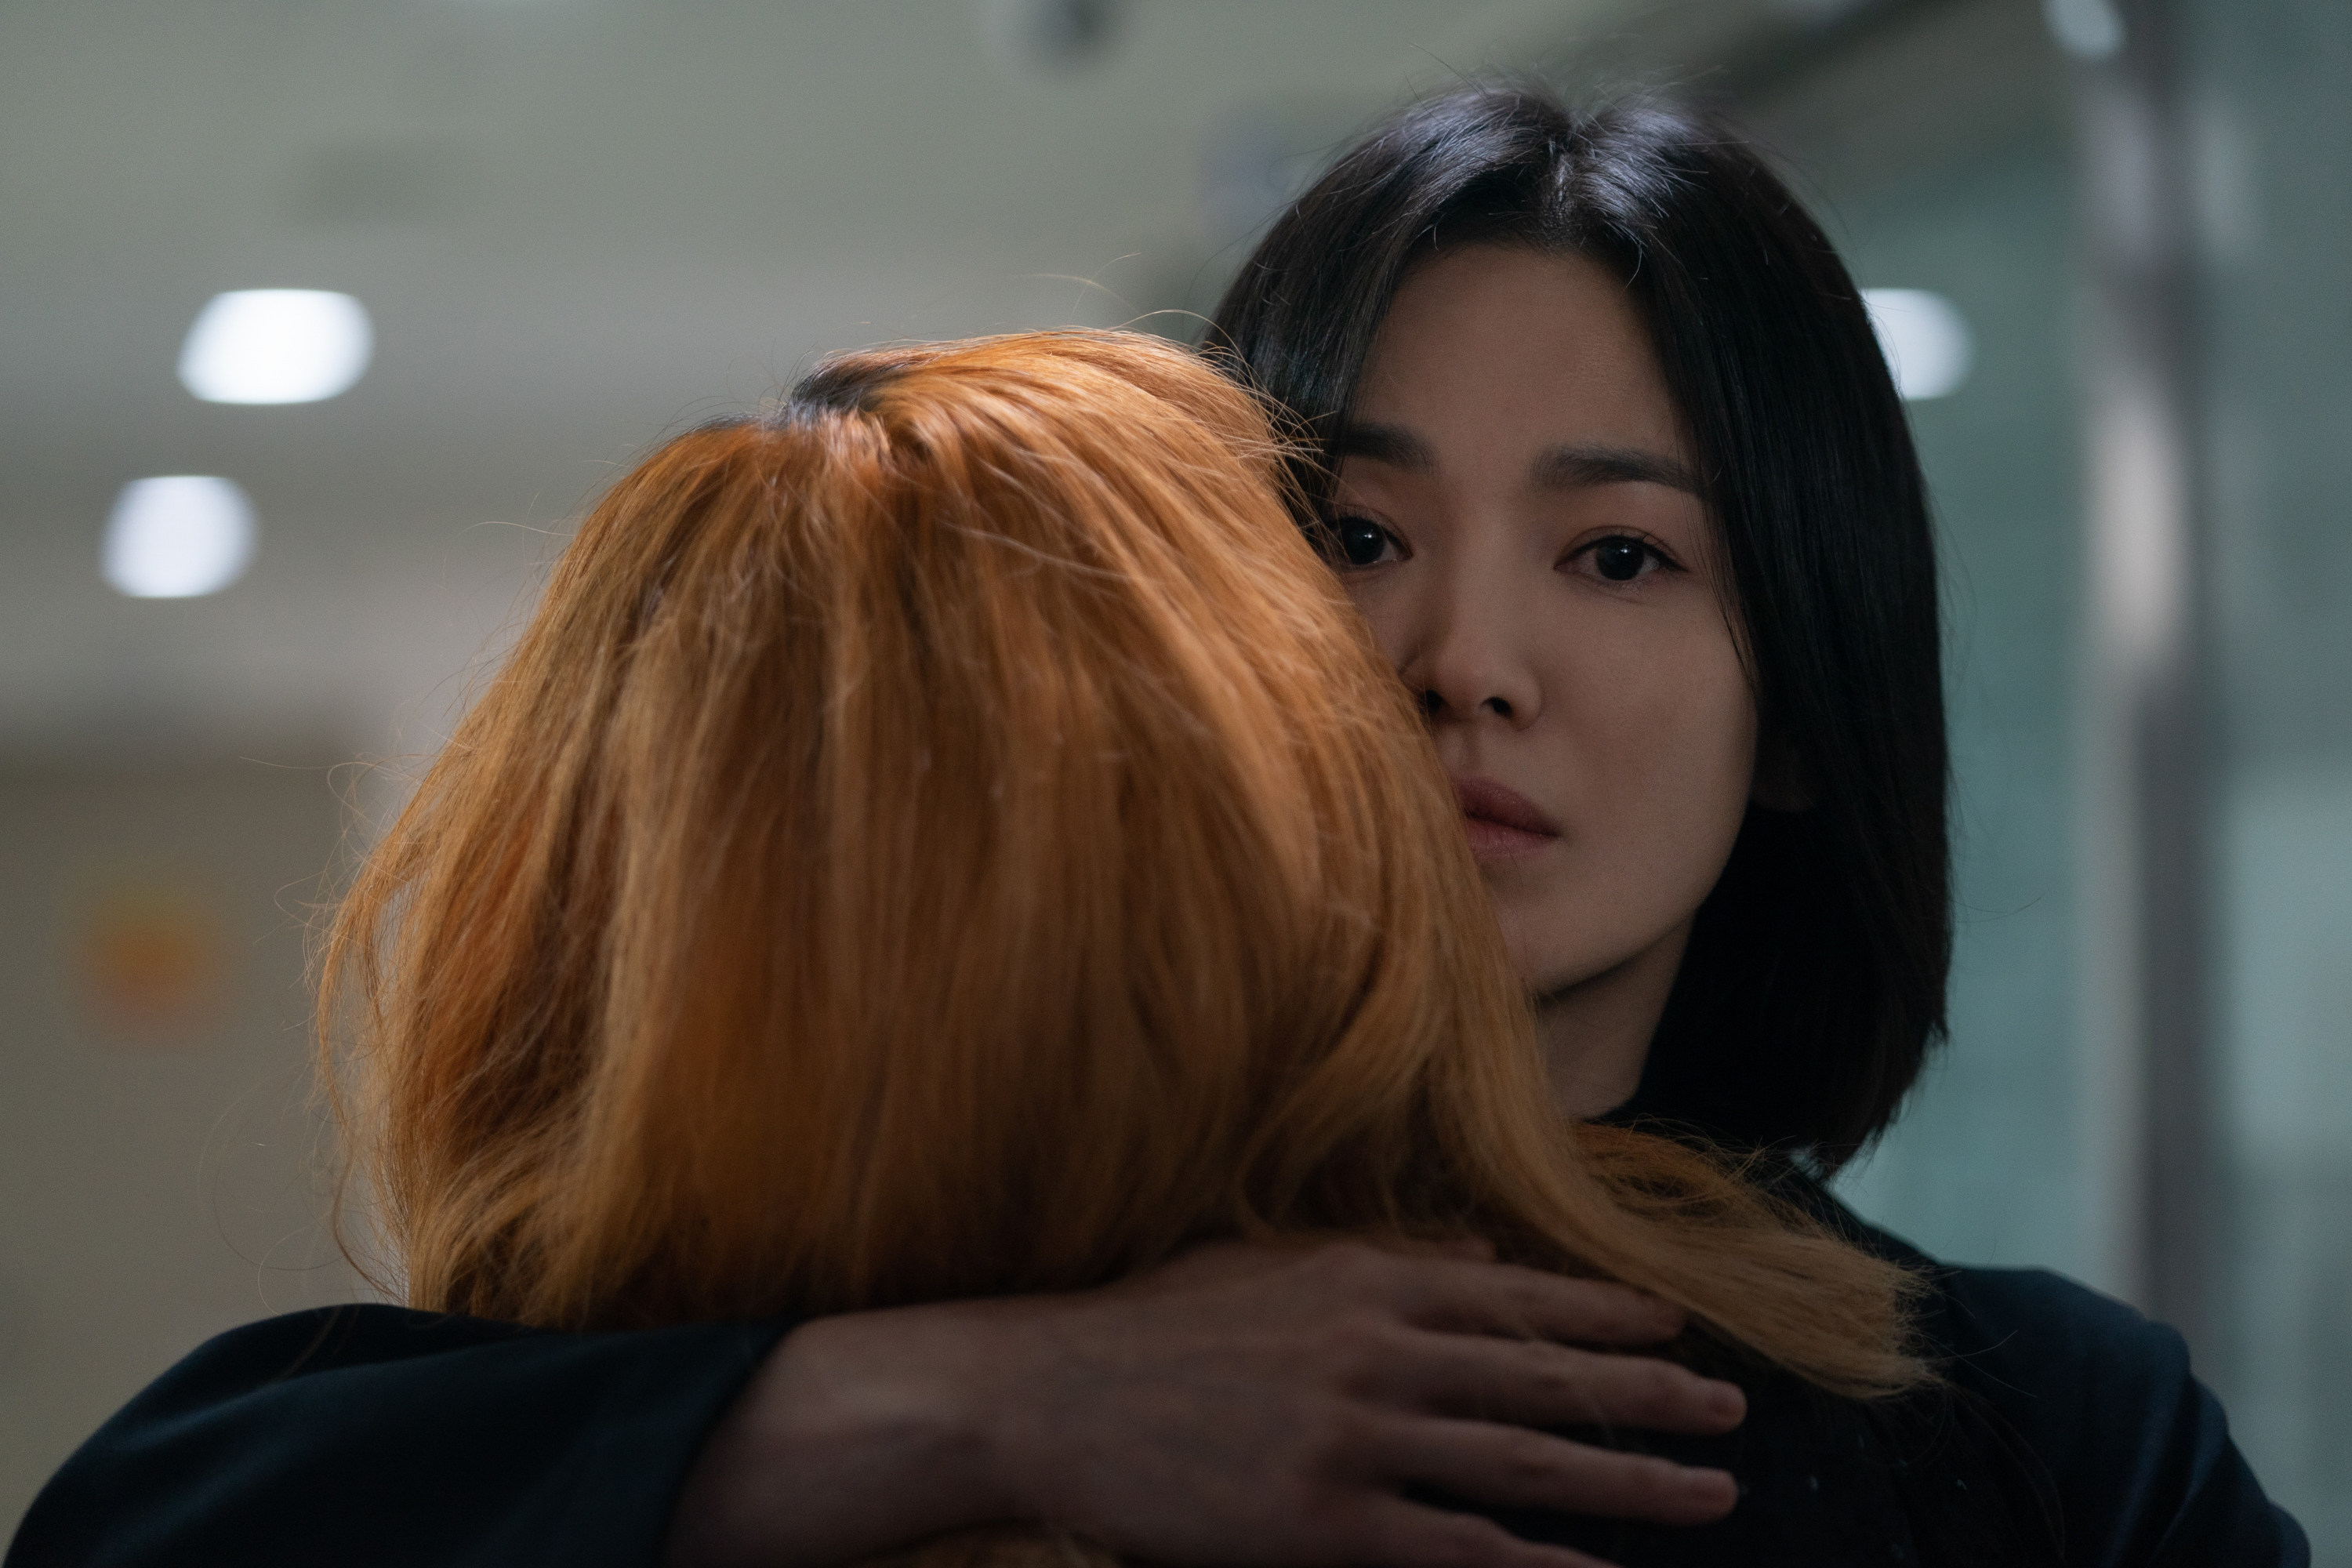 Song Hye-kyo as Moon Dong-eun in a still from The Glory Part 2. Photo: Graphyoda/Netflix.